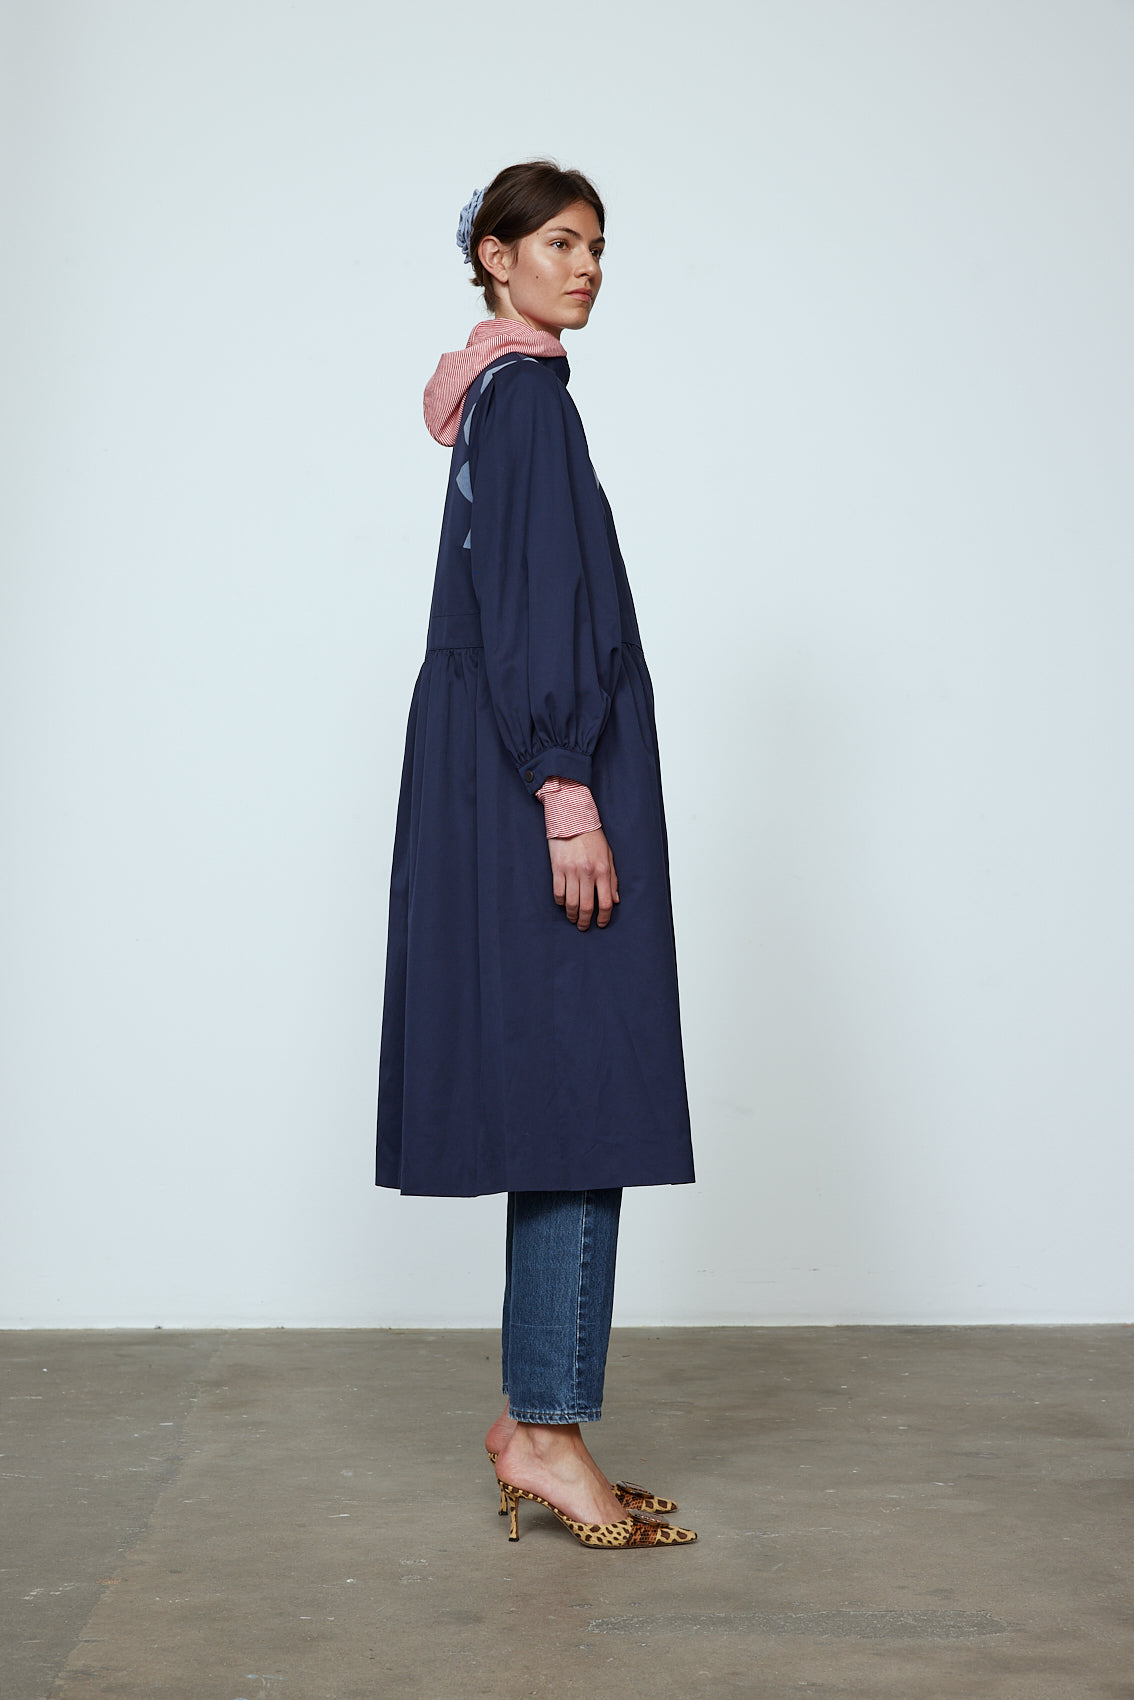 Agnes Coat in Navy Canvas with Dove Blue corduroy triangular details. The Jacket features a hidden push-button closing and balloon sleeves.  Material: Shell: 100% cotton. Lining: 100% viscose.